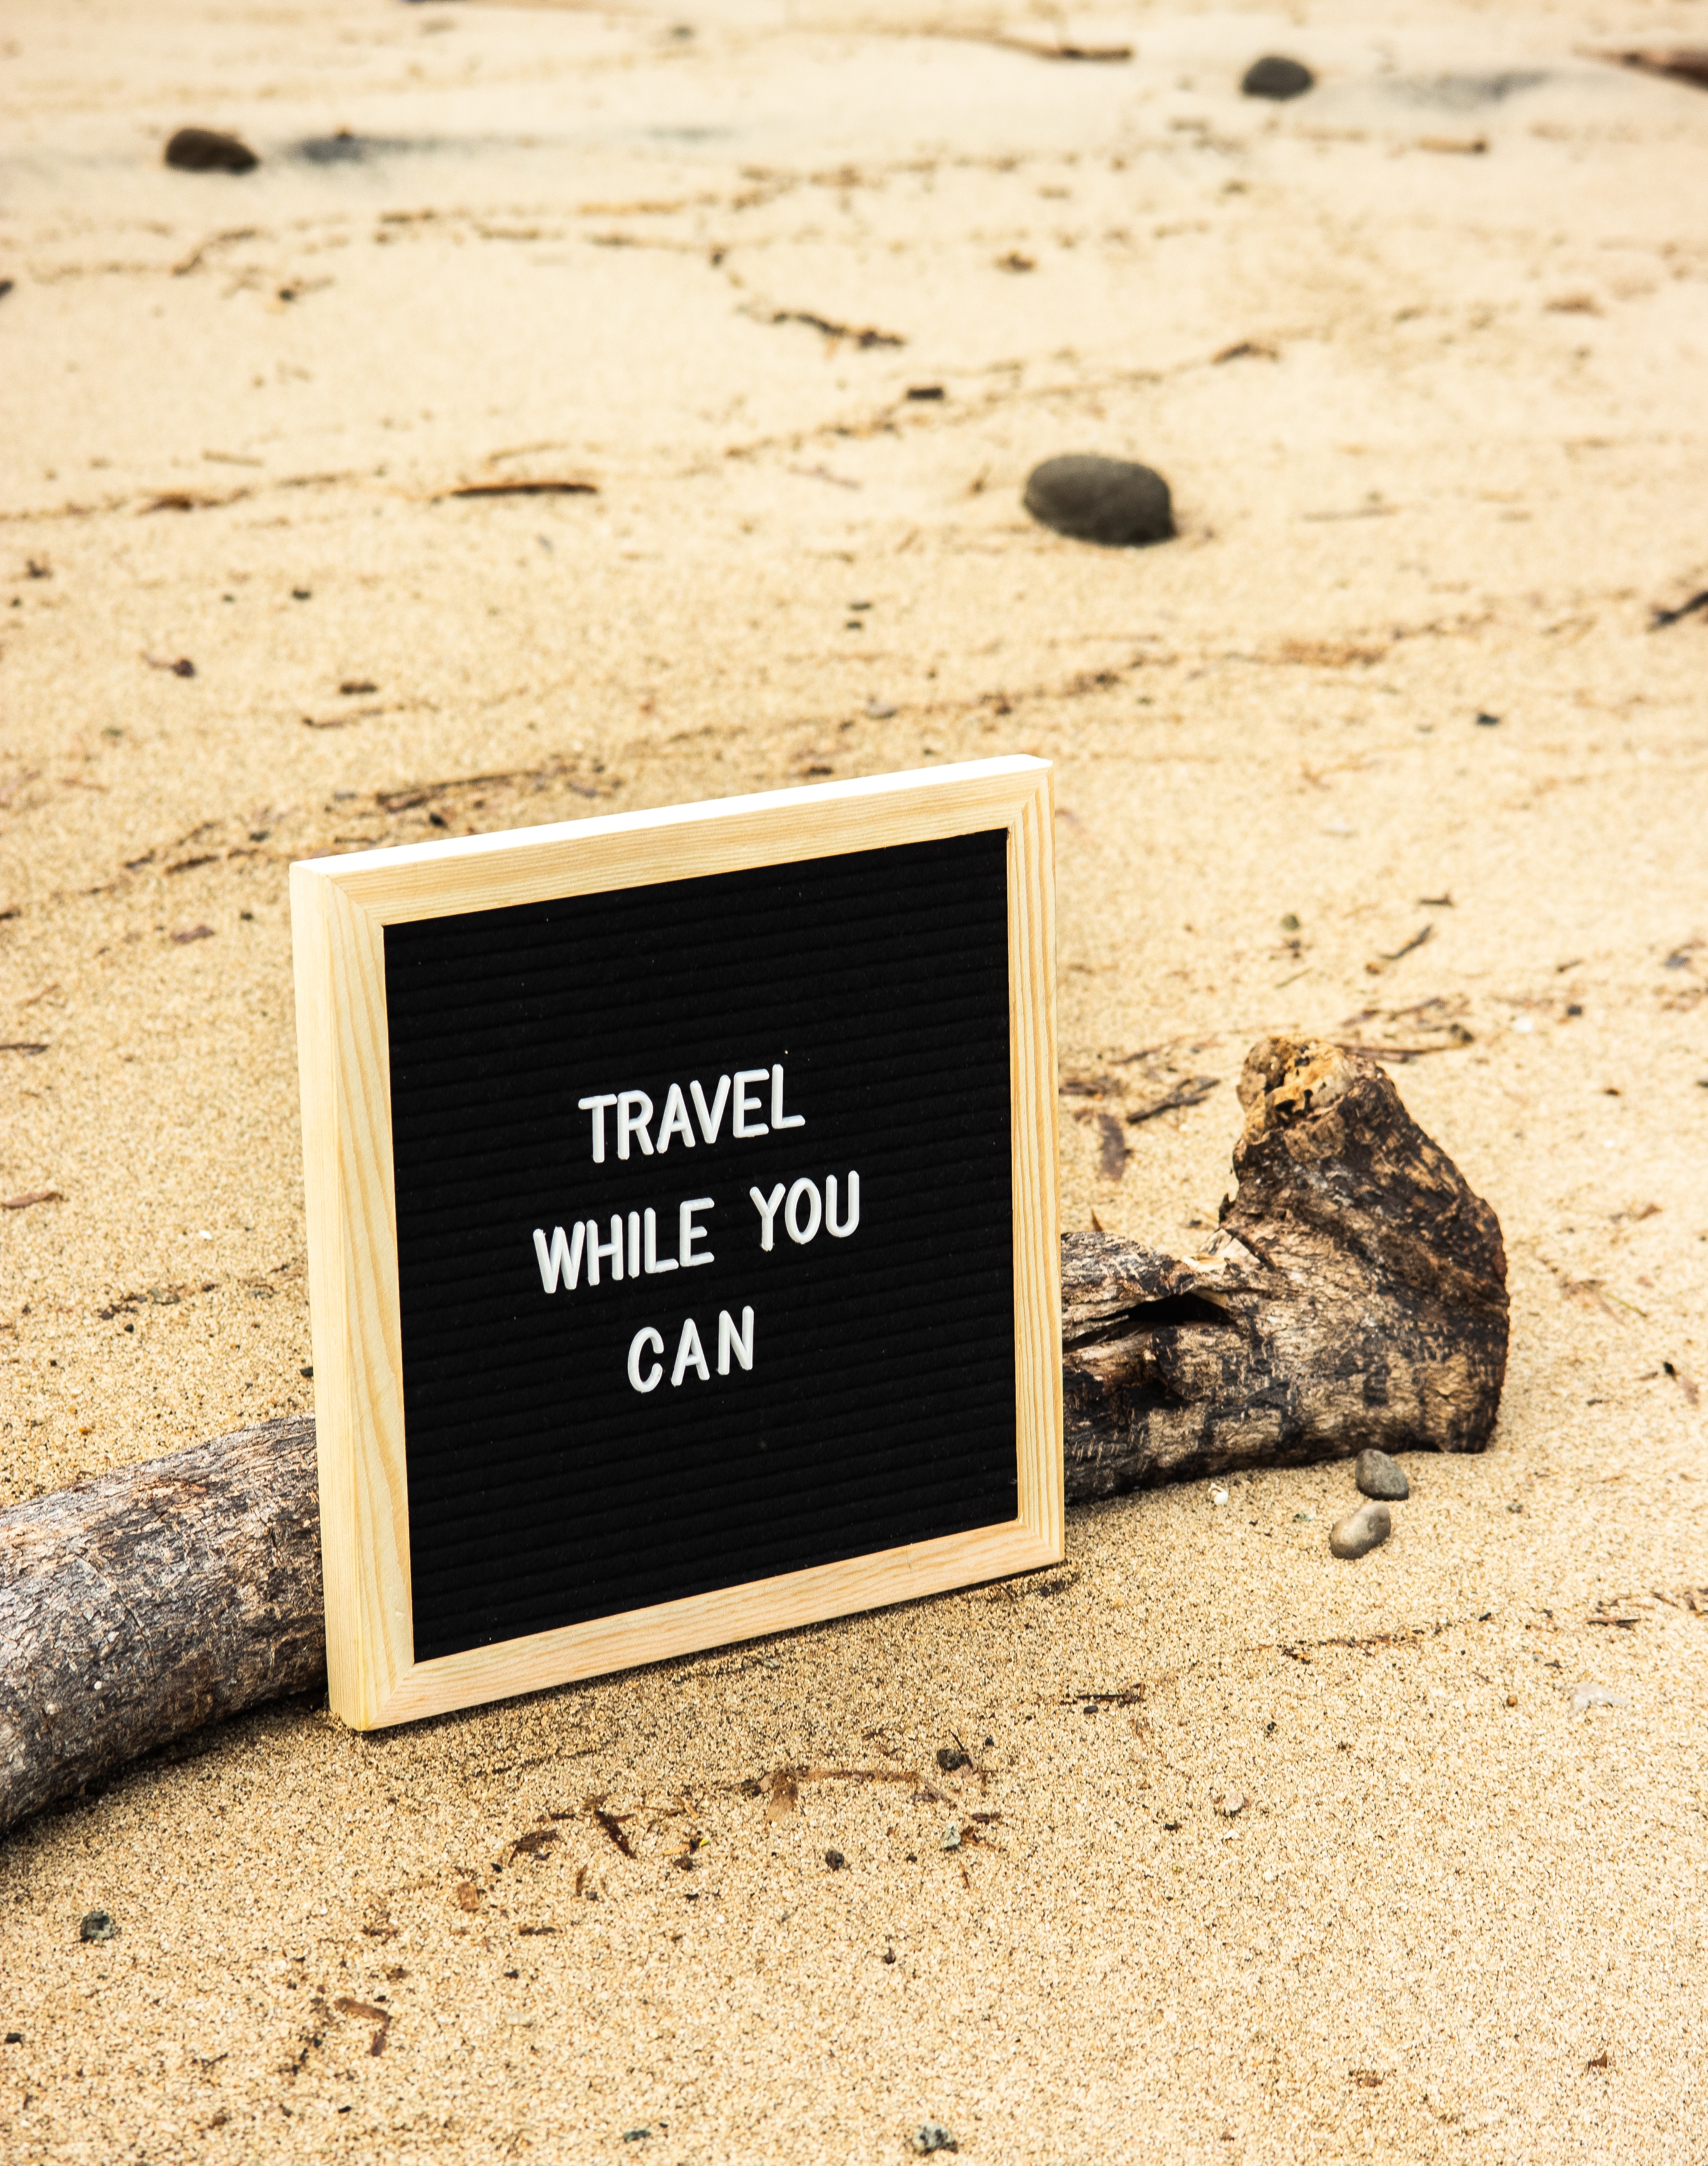 A sign reading "travel while you can" propped against a log on a sandy beach